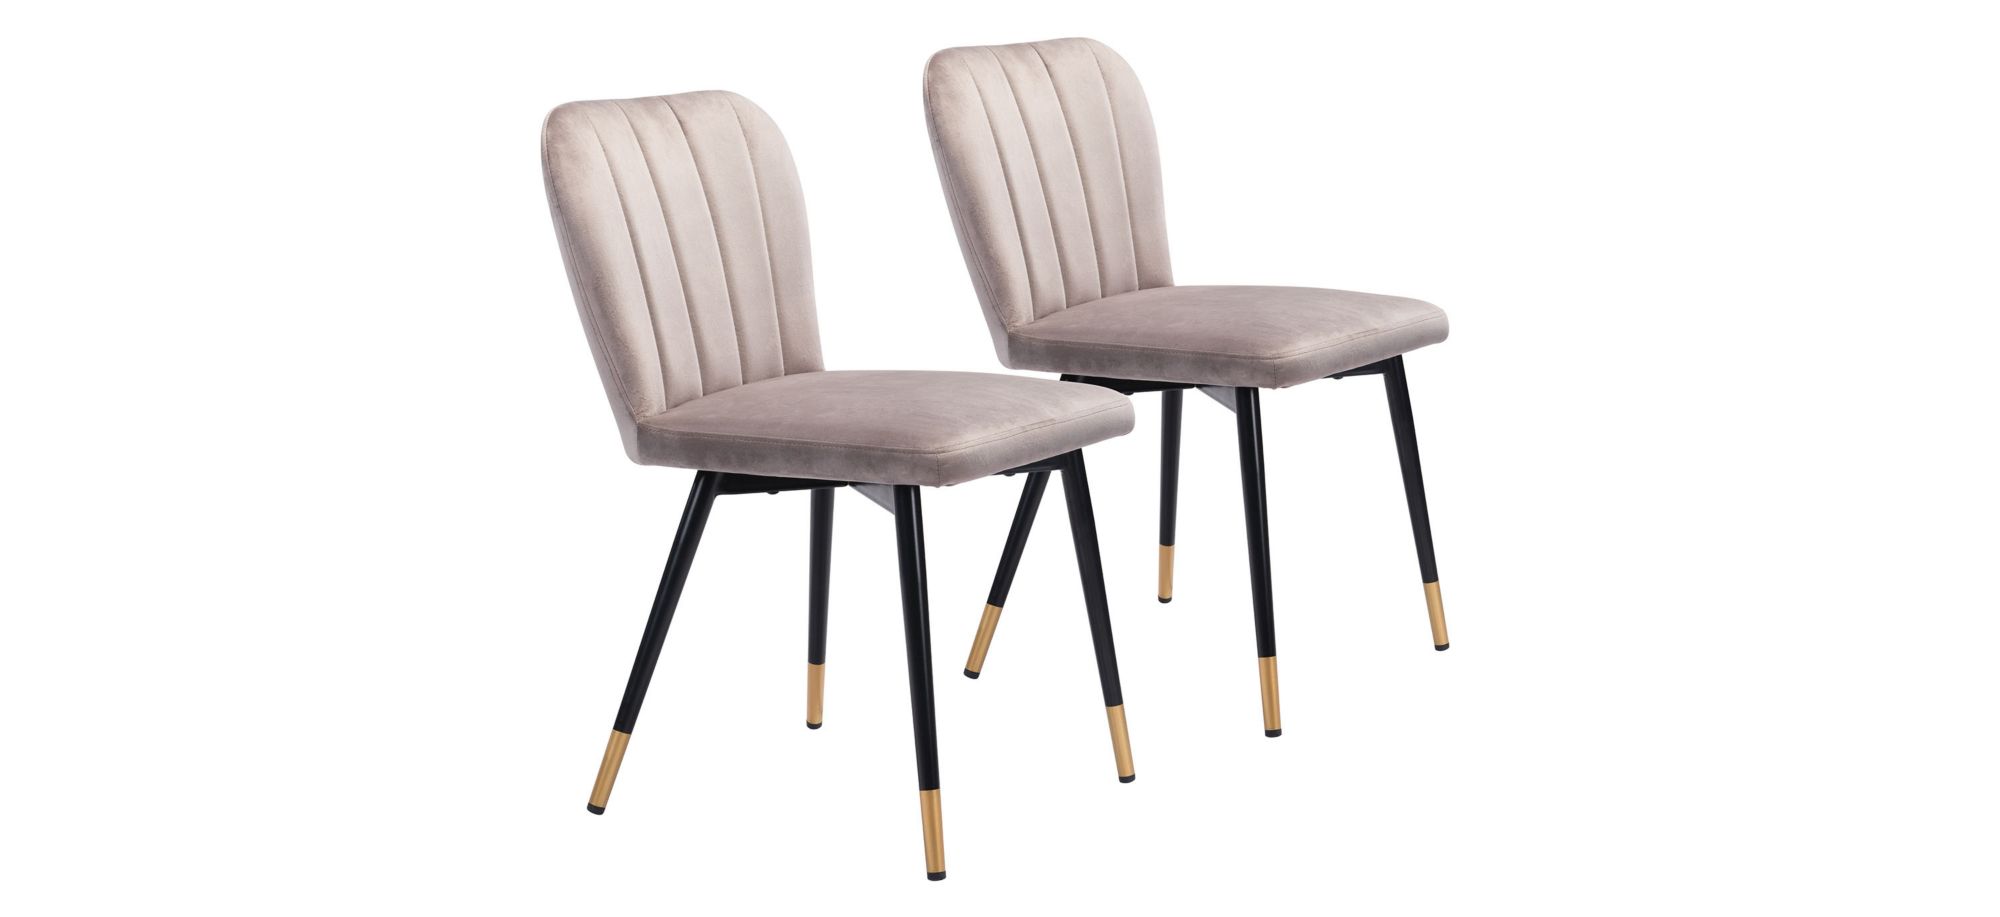 Manchester Dining Chair: Set of 2 in Gray, Black & Gold by Zuo Modern